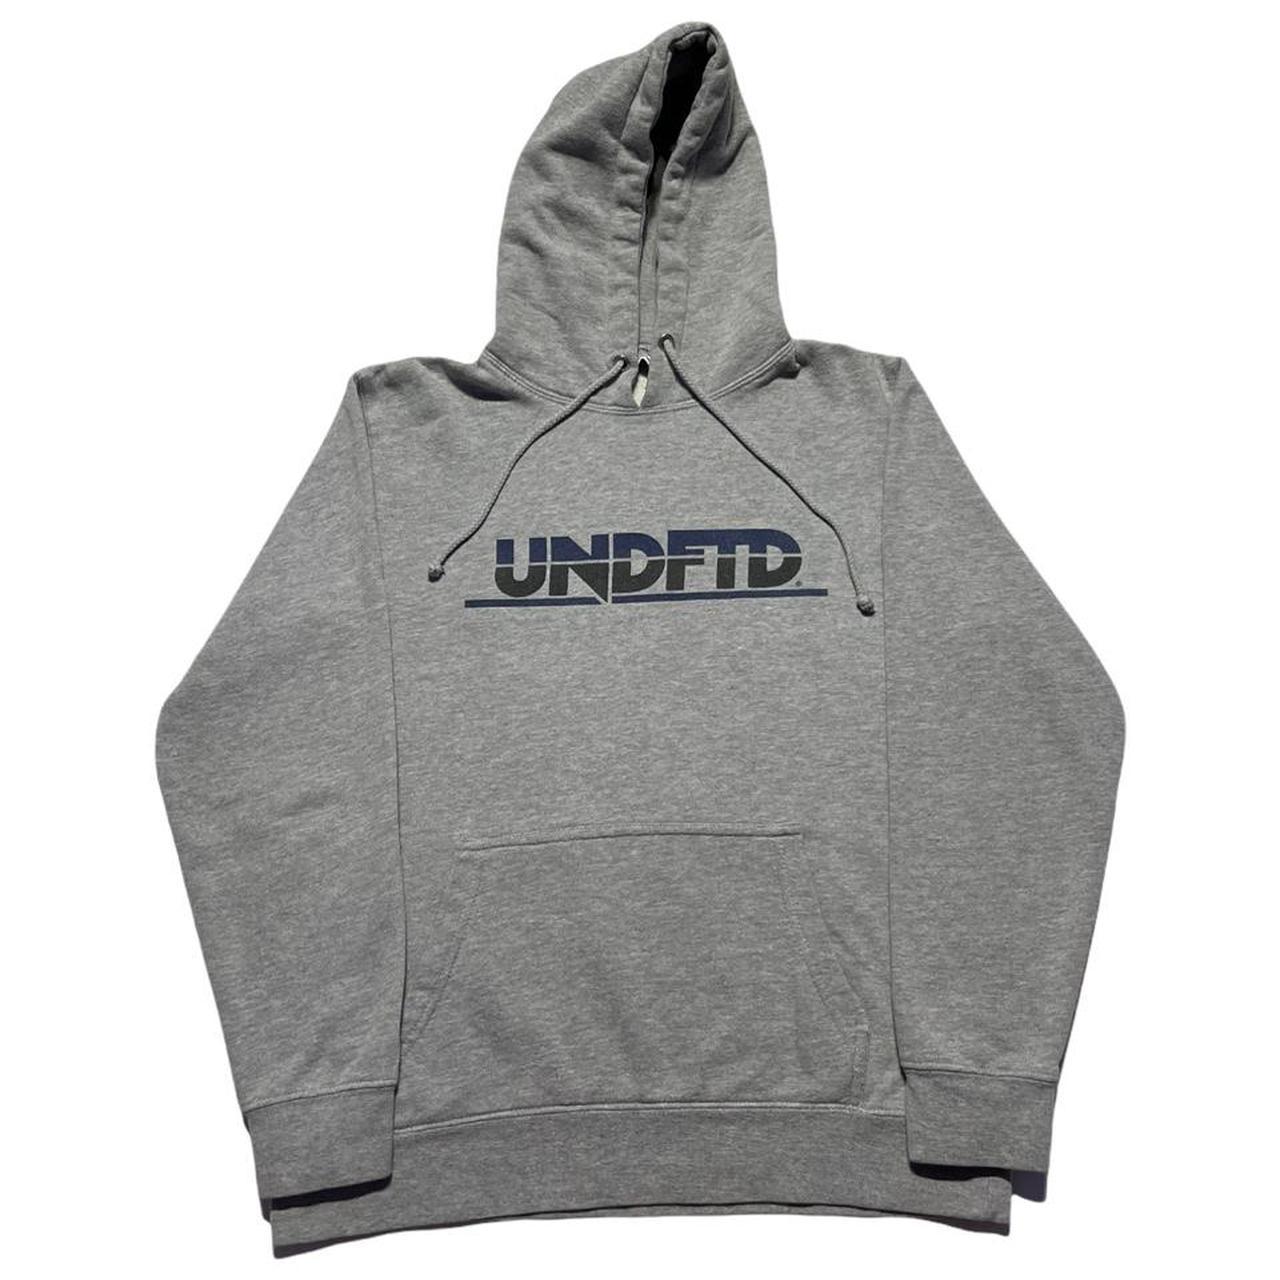 Undefeated Men's Grey and Blue Hoodie